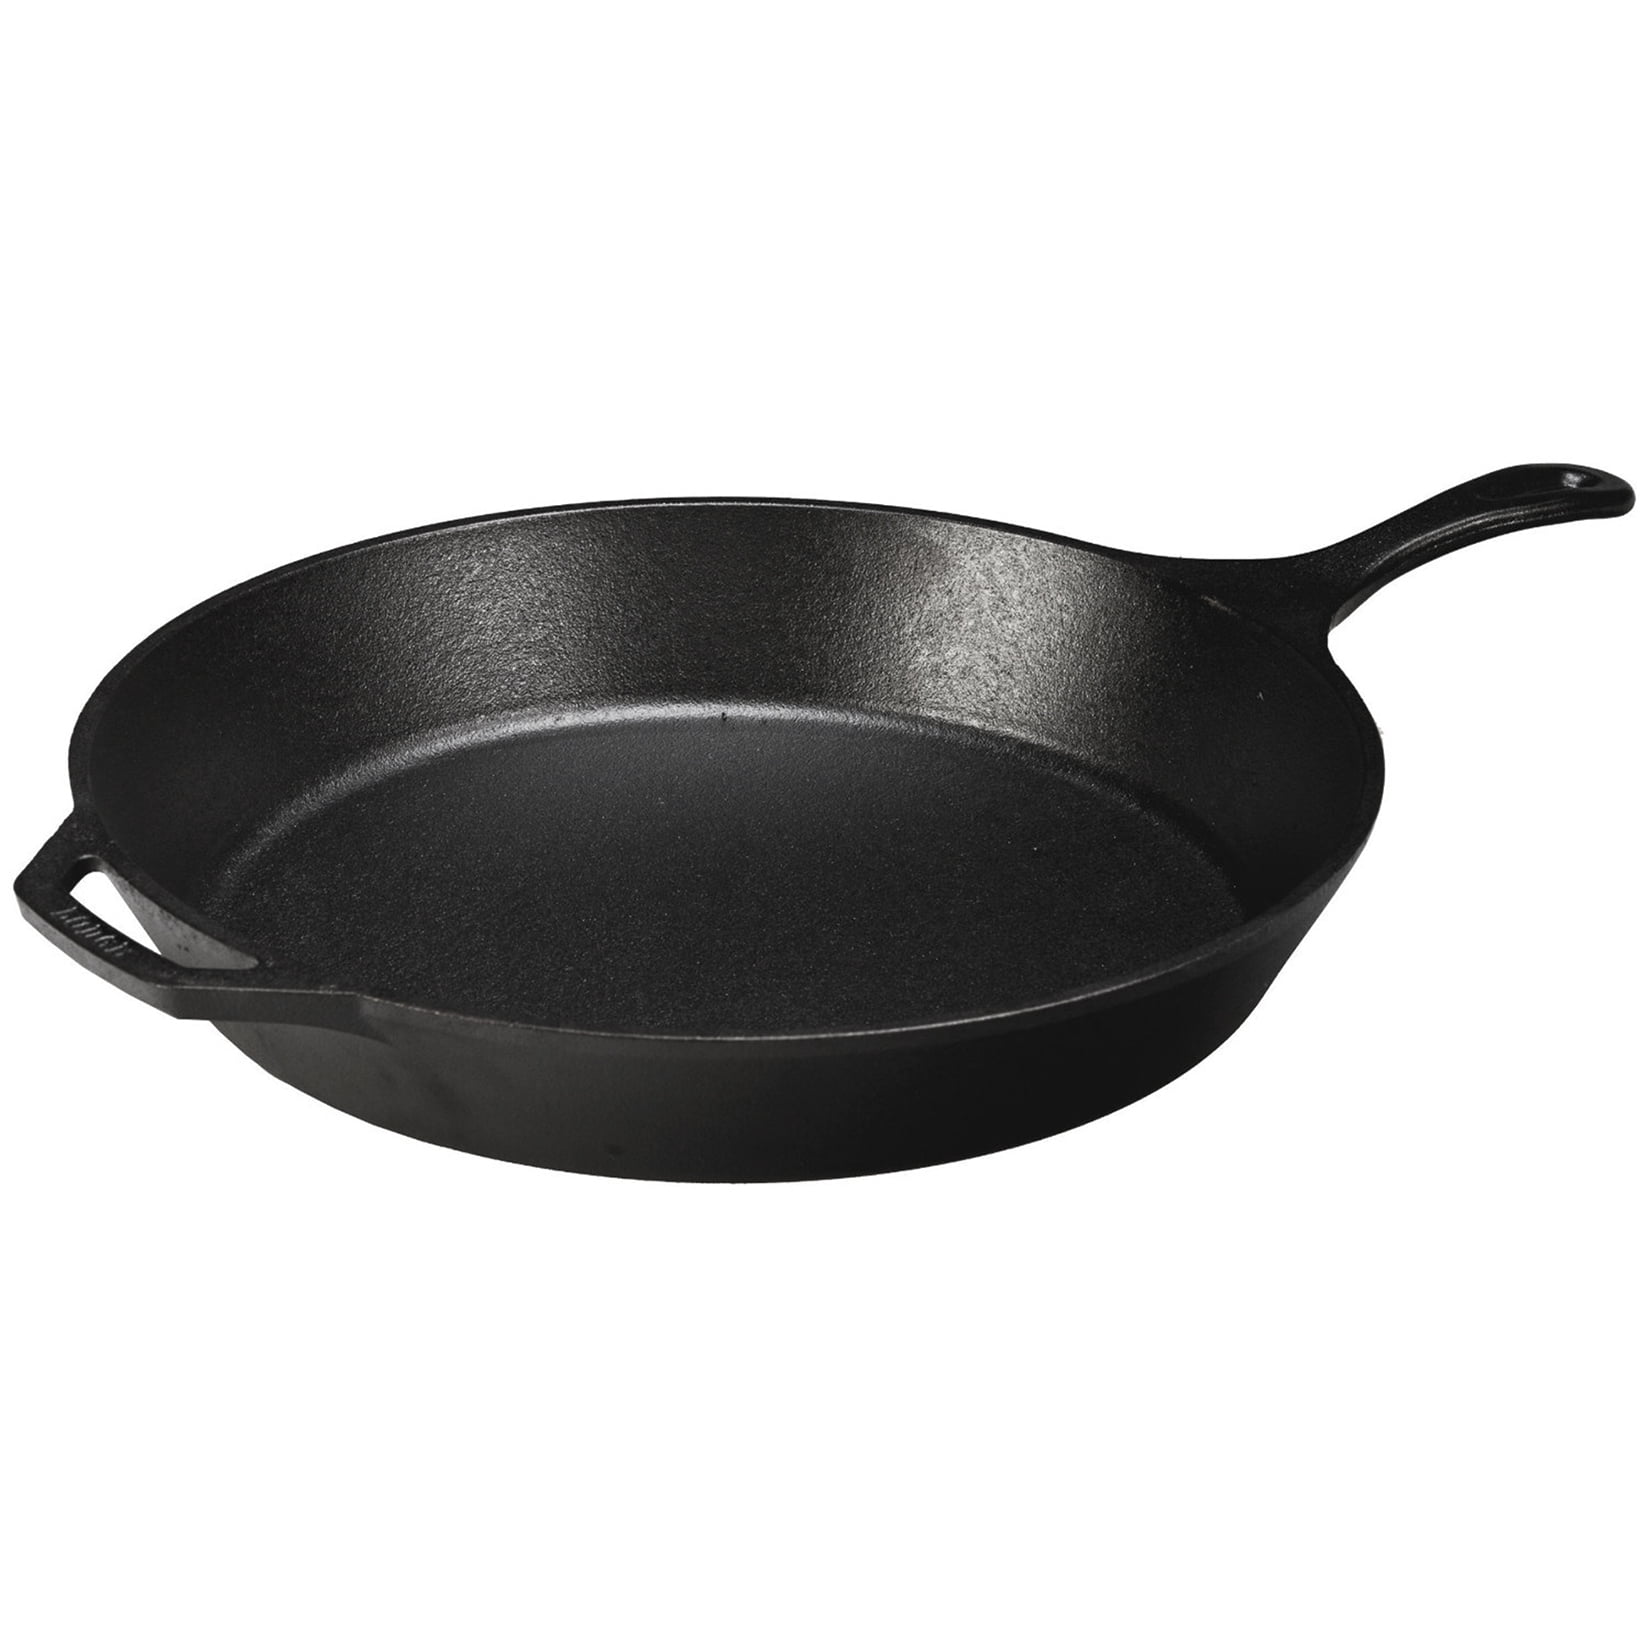 Always in Season: A closer look at the Lodge Cast Iron skillet 